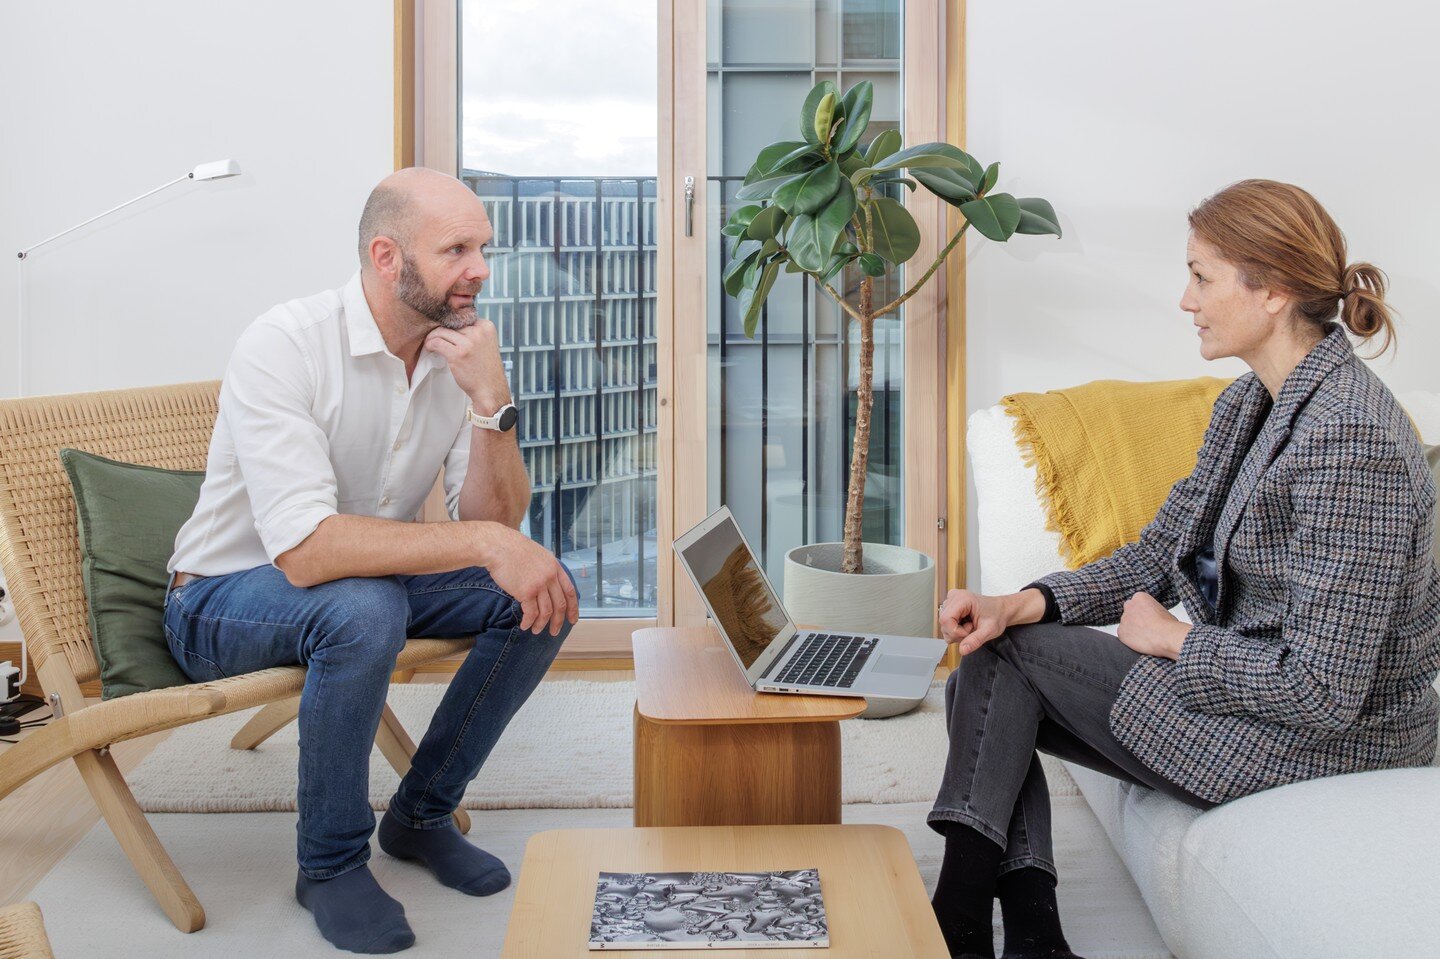 So cool to photograph some of the team involved in Stockholm Tr&auml;dstad and provide them with some of the photos for their marketing. 
.
#nordicliving
#interior4all
#interiordesign
#interiorphotographer
#scandinaviandesign
#scandinavianhome
#scand